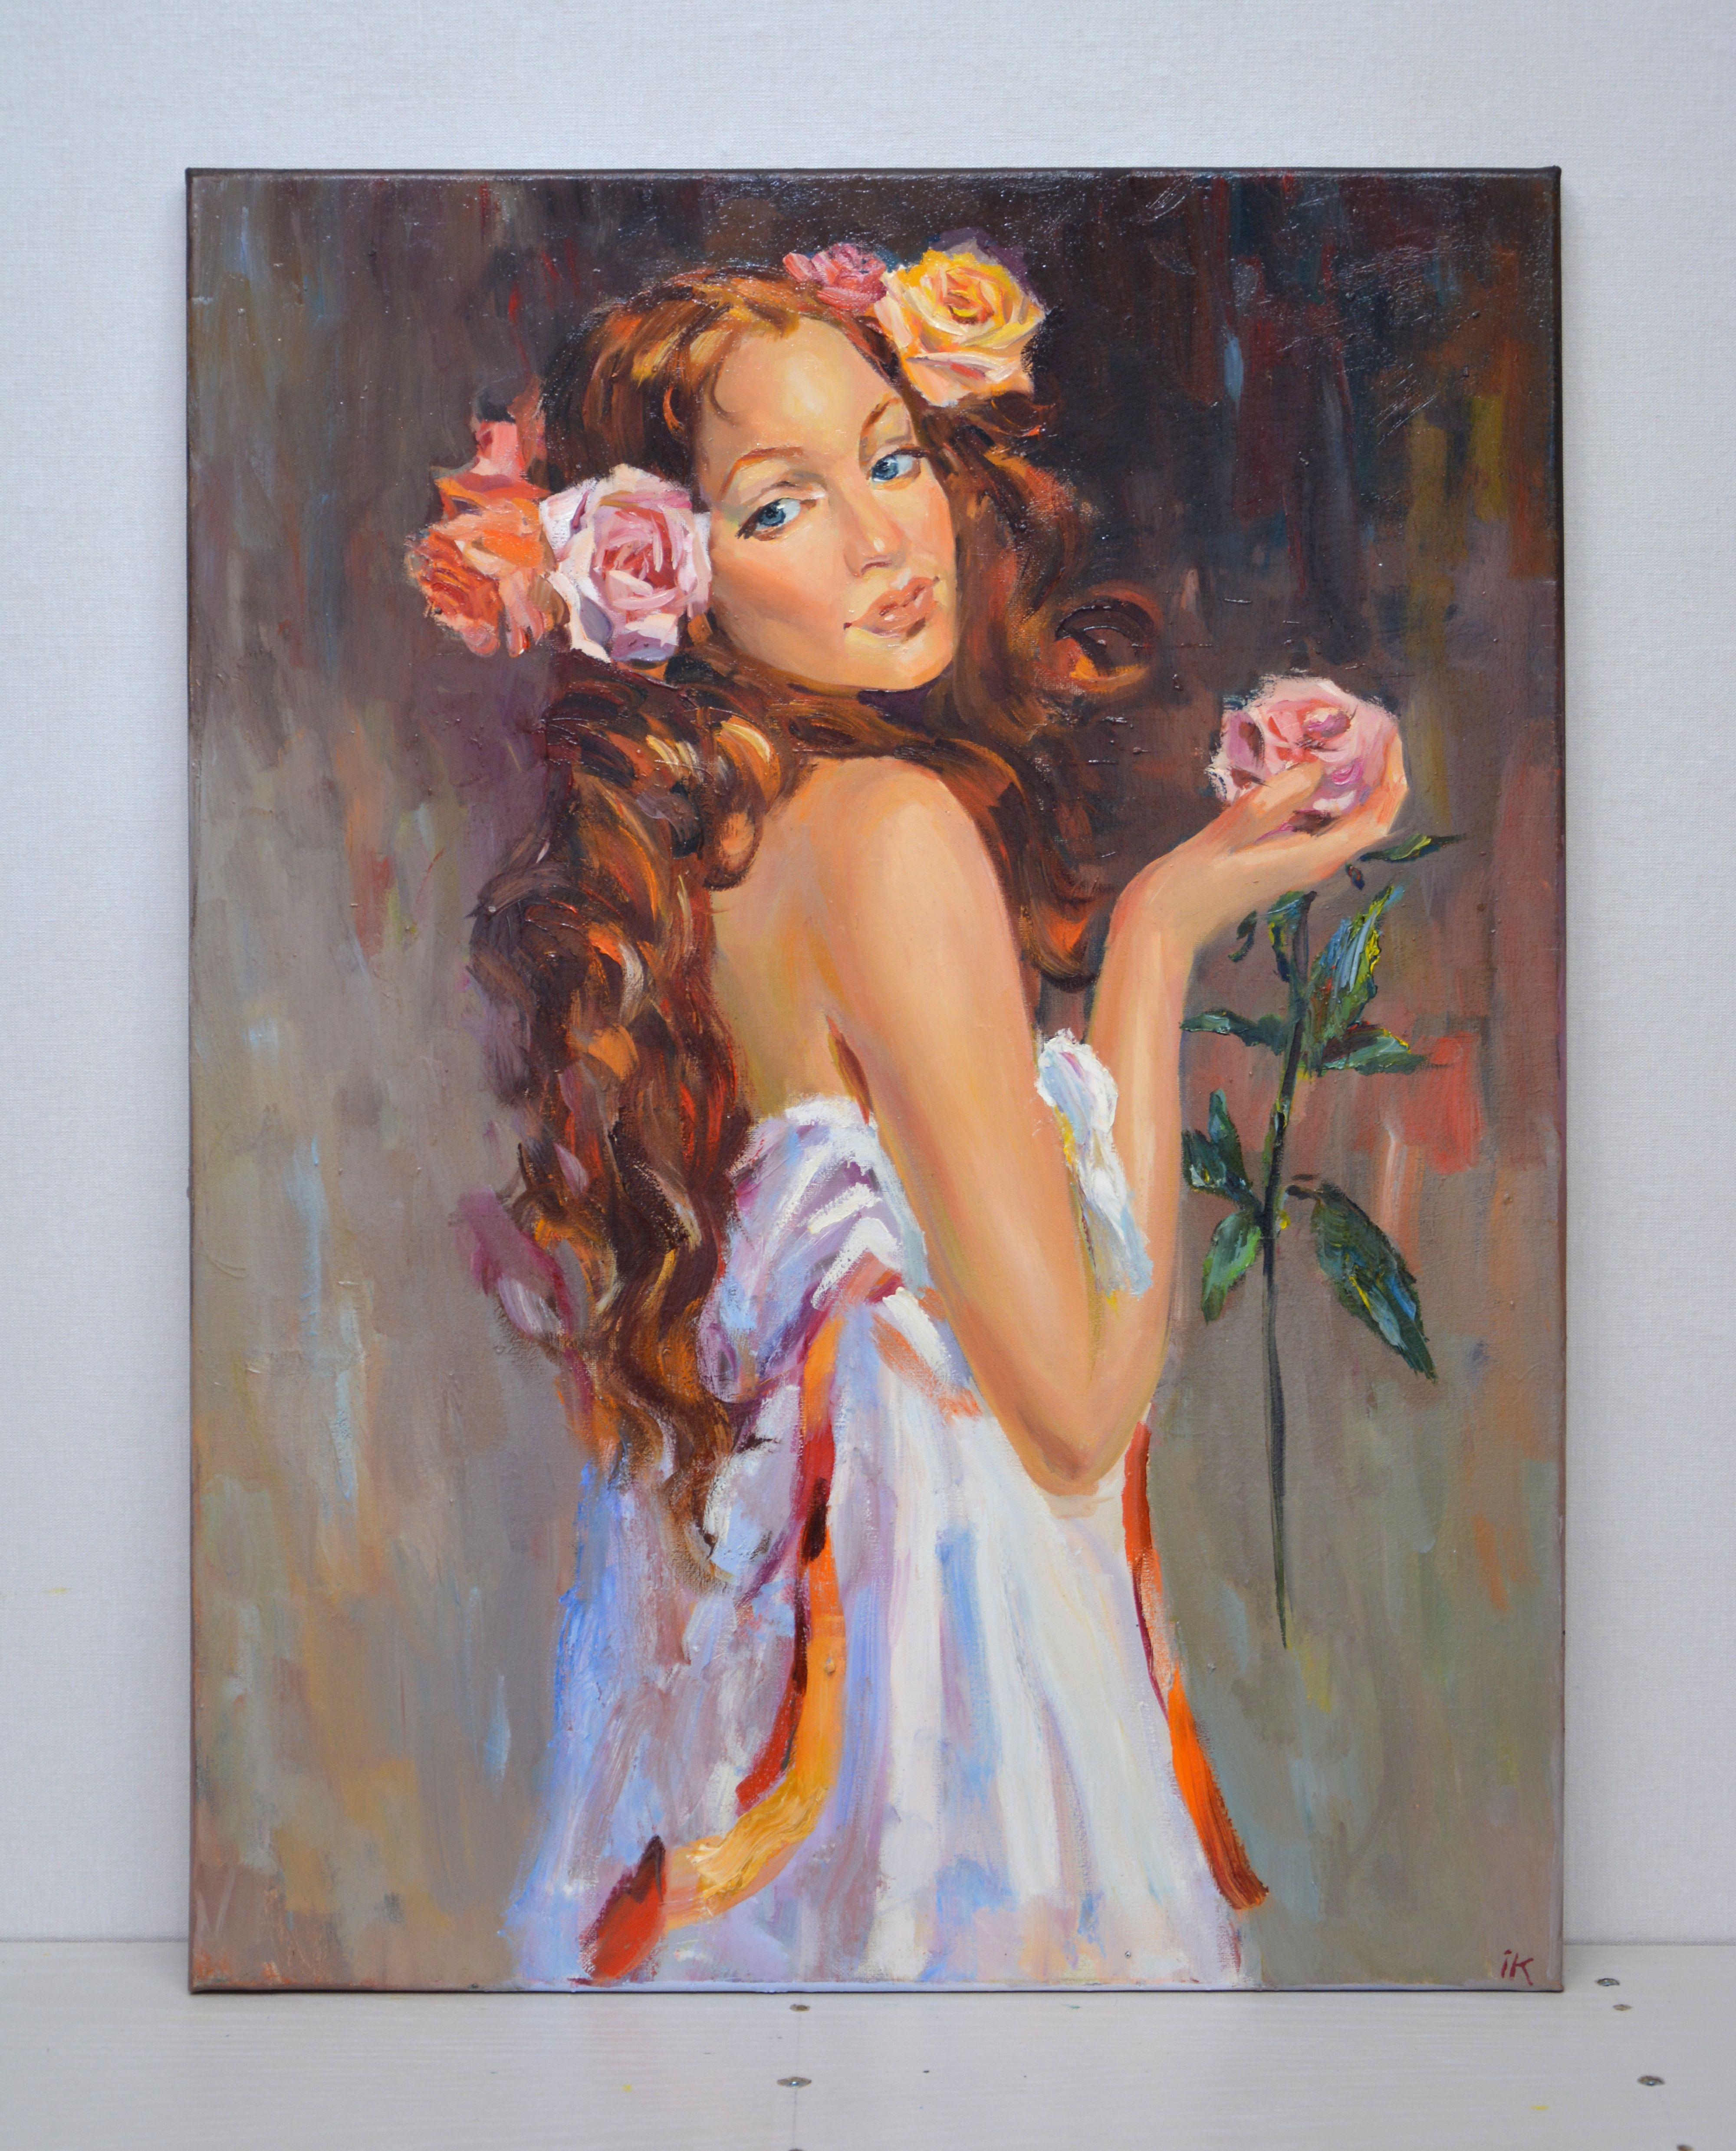 A girl with red hair, in a white dress with a rose in her hand. Realism. Allegory of flora. Oil painting on canvas, varnished, sides painted in the color of the painting, ready to be suspended, signed a certificate of authenticity. :: Painting ::